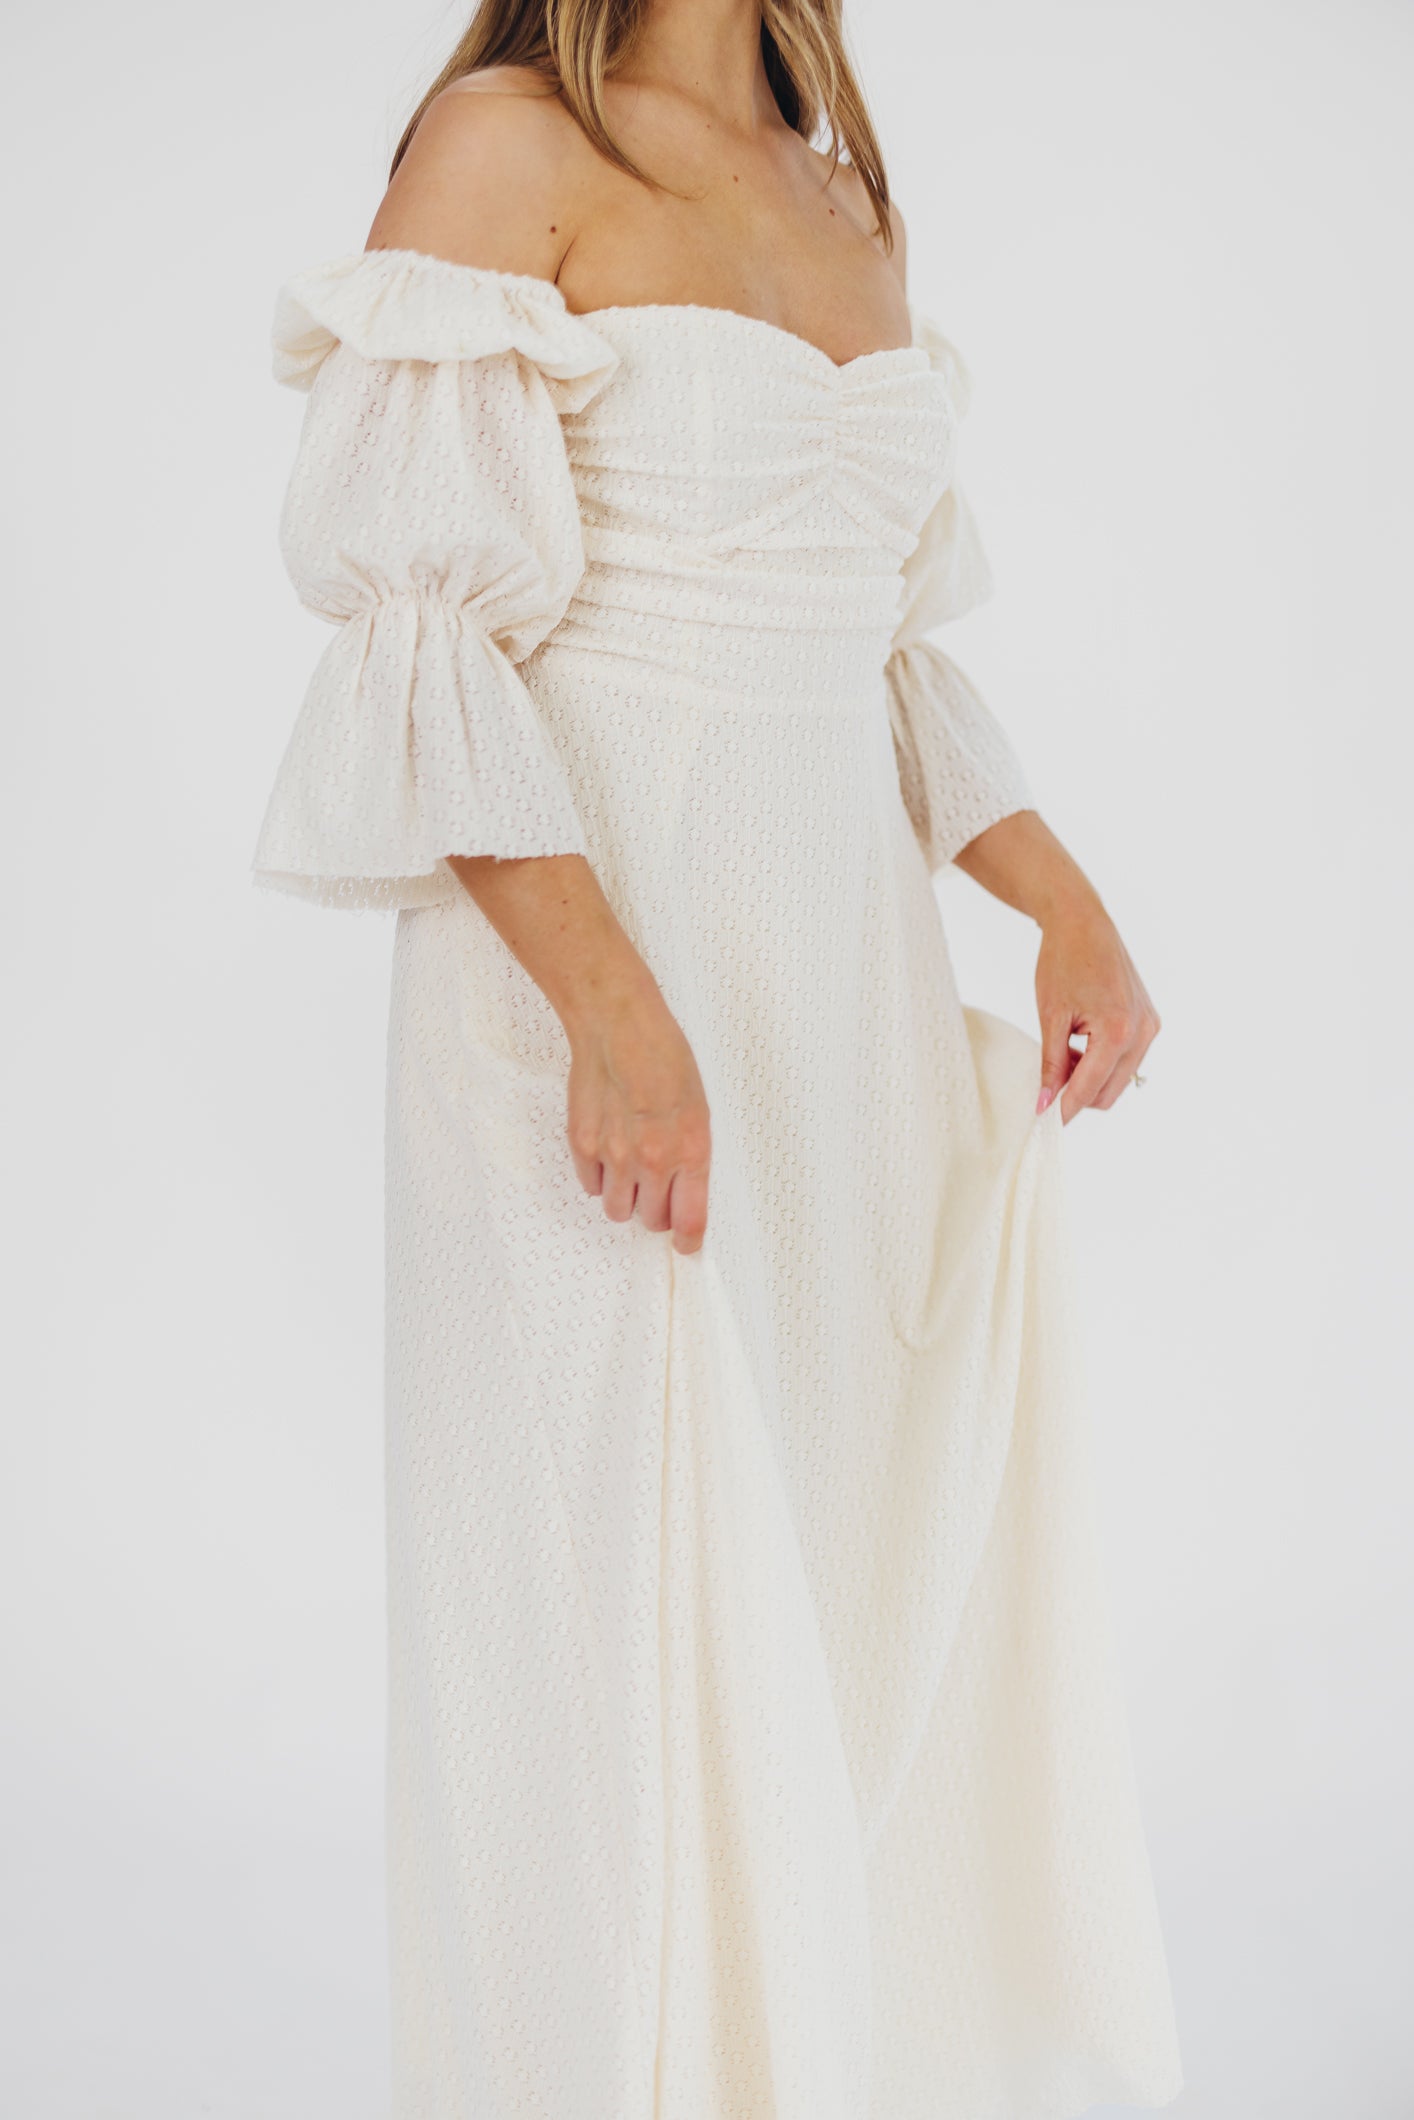 Corrine Tiered Sleeve Maxi Dress with Pockets in Ivory Cream - Bump Friendly